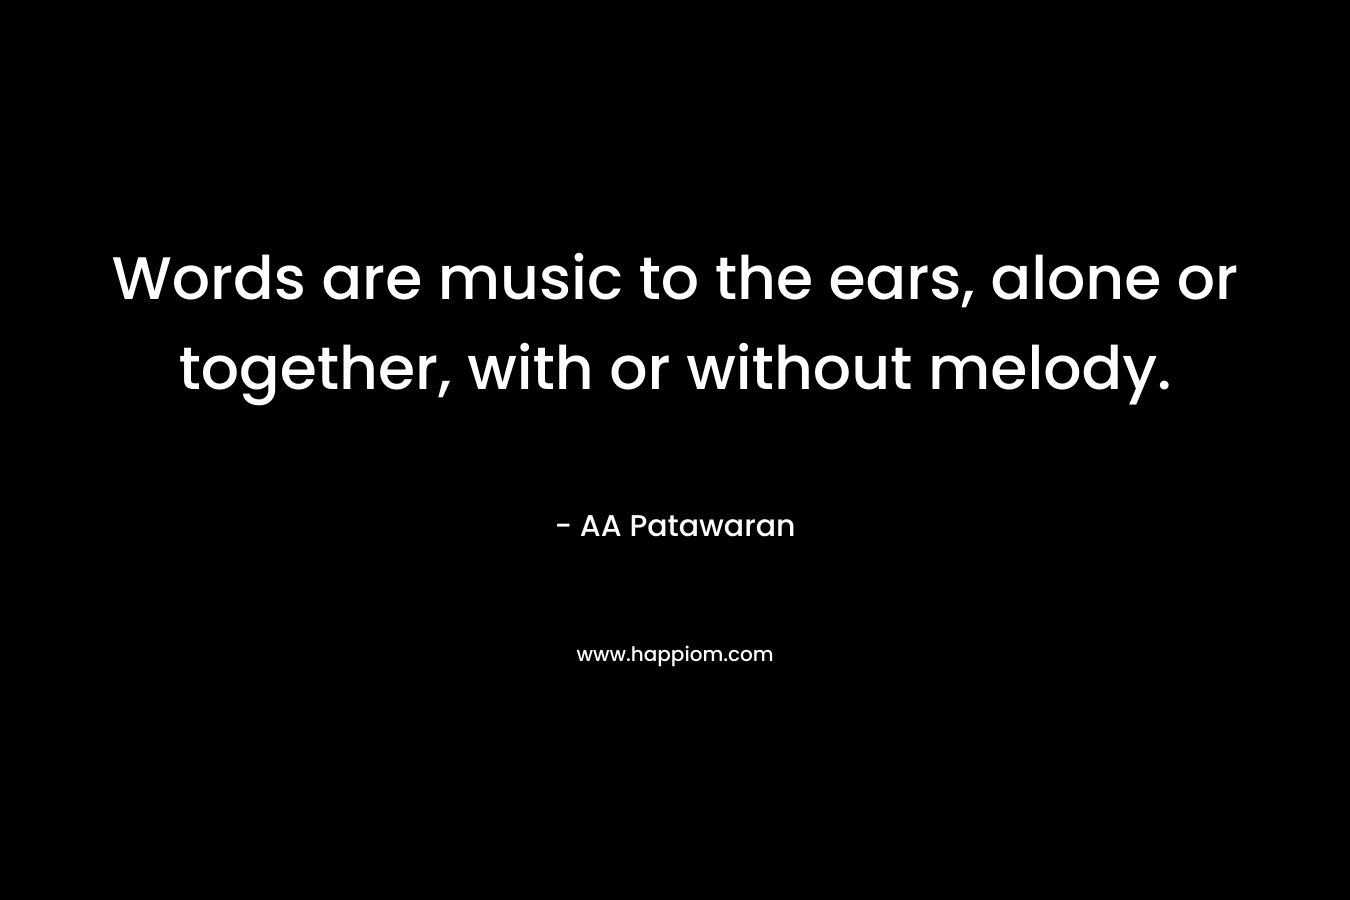 Words are music to the ears, alone or together, with or without melody. – AA Patawaran